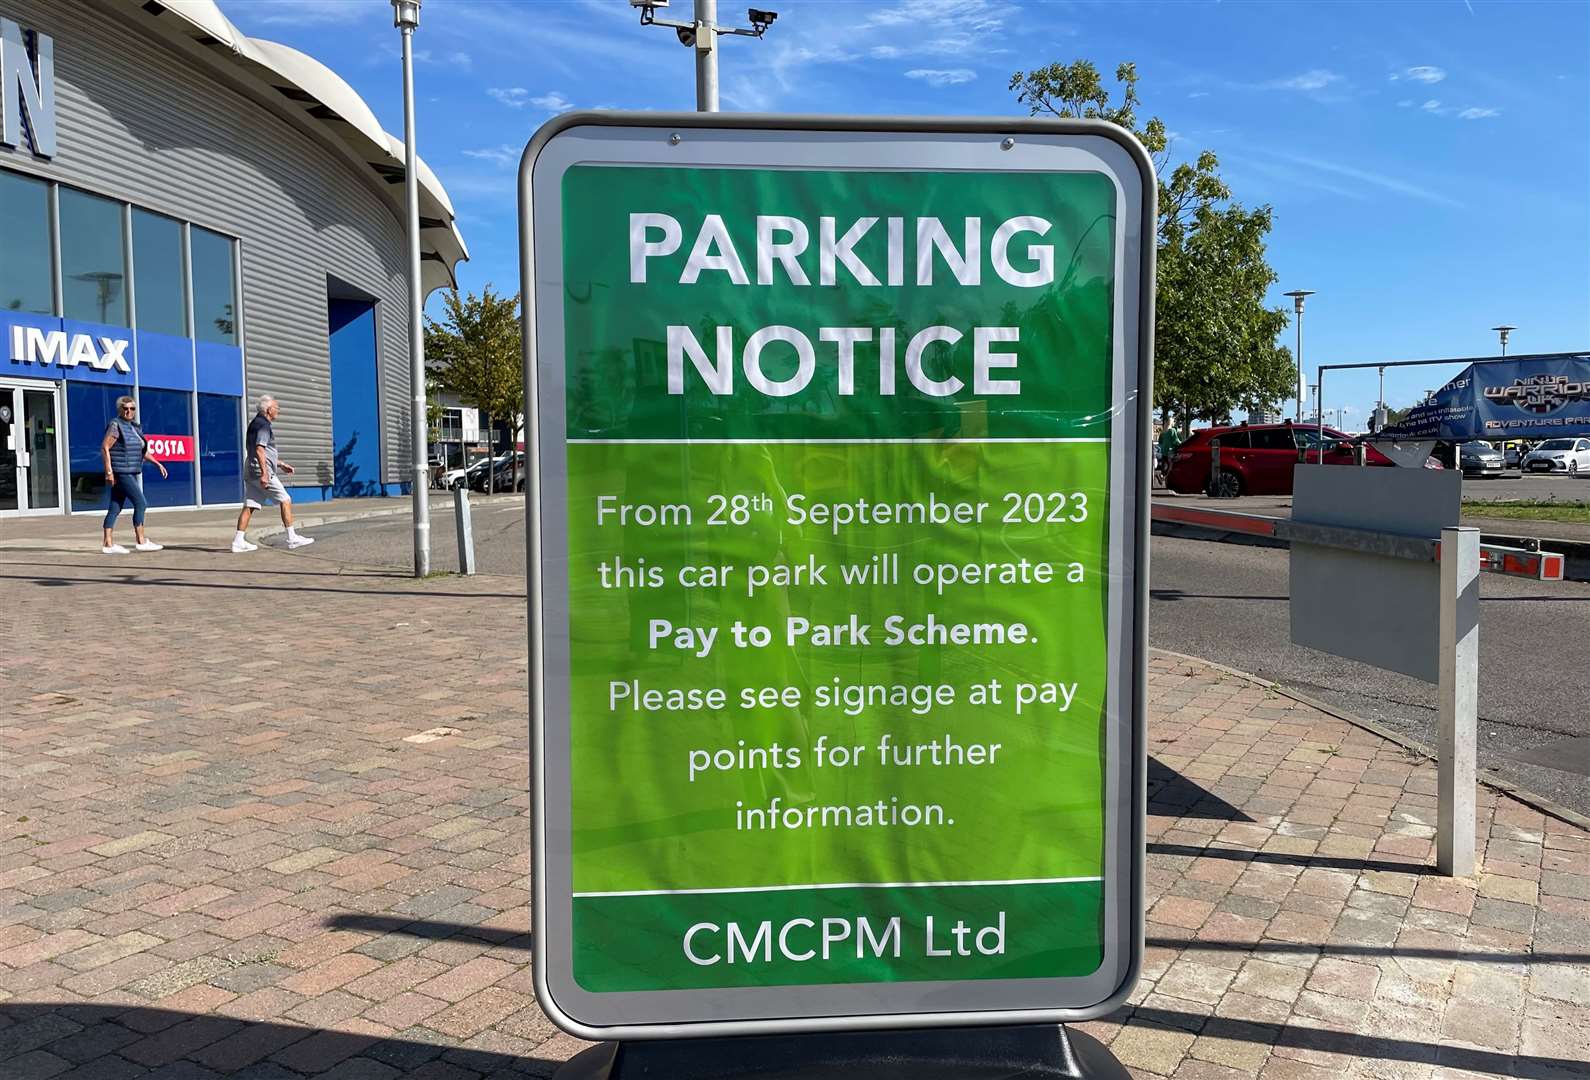 Delay in parking charges in Dockside